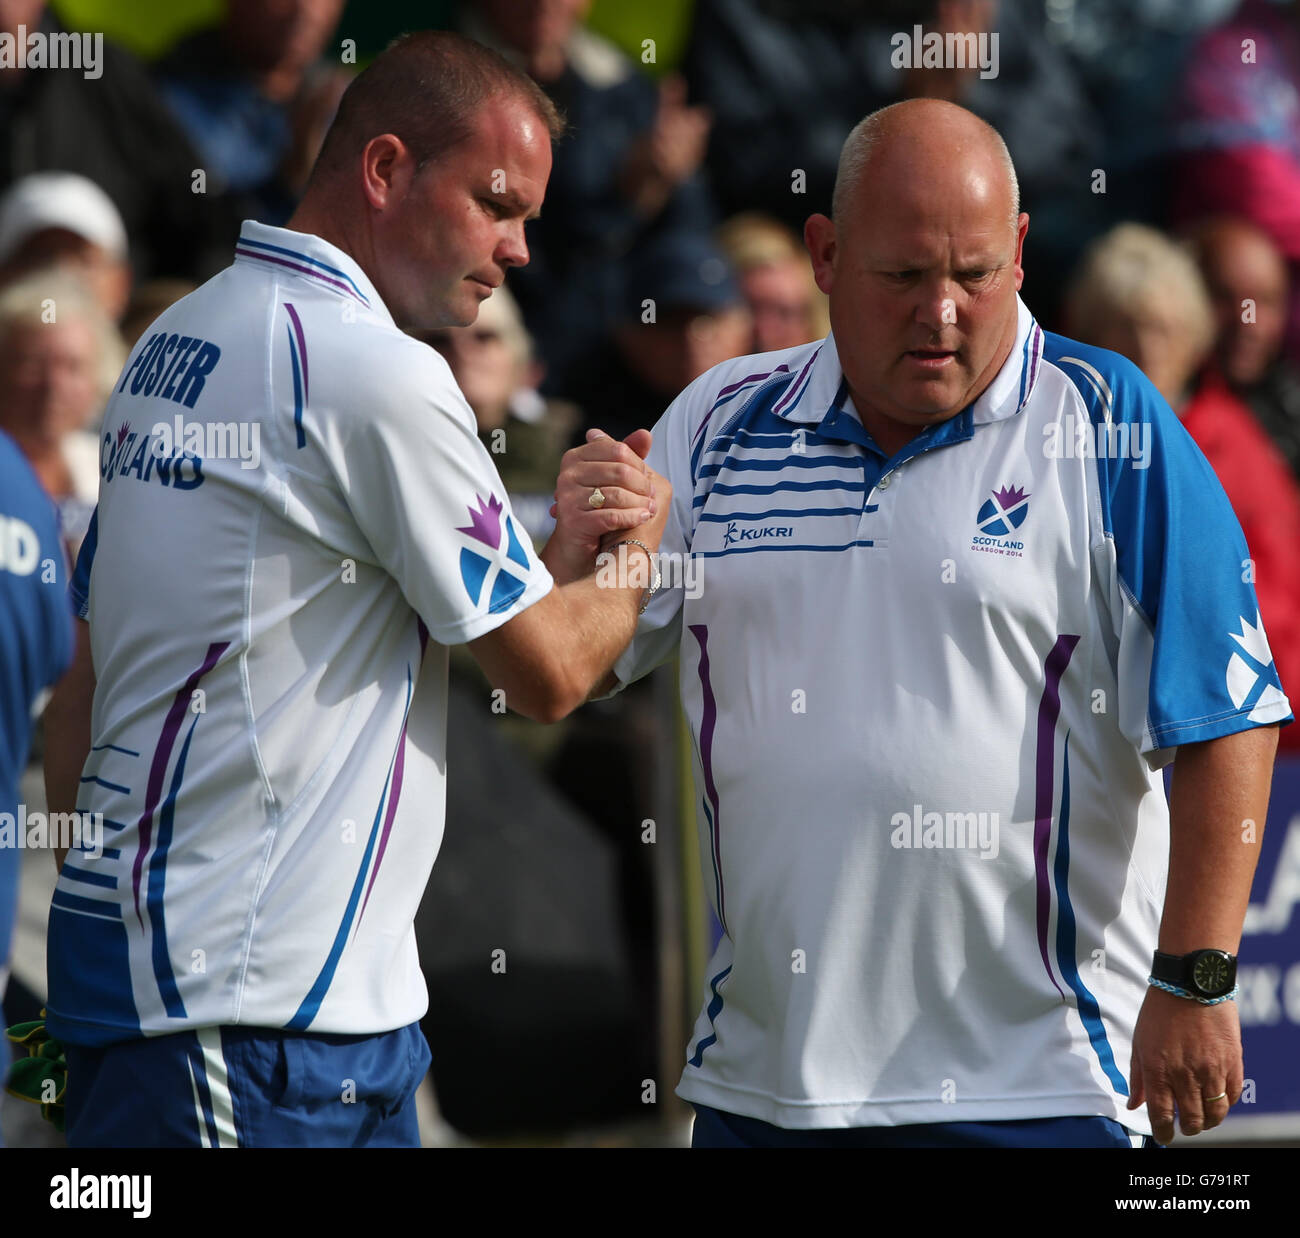 Scotland's Paul Foster and Alex Marshall celebrate a shot in their Semi-final Men's Fours match against Australia at Kelvingrove Lawn Bowls Centre, during the 2014 Commonwealth Games in Glasgow. Stock Photo